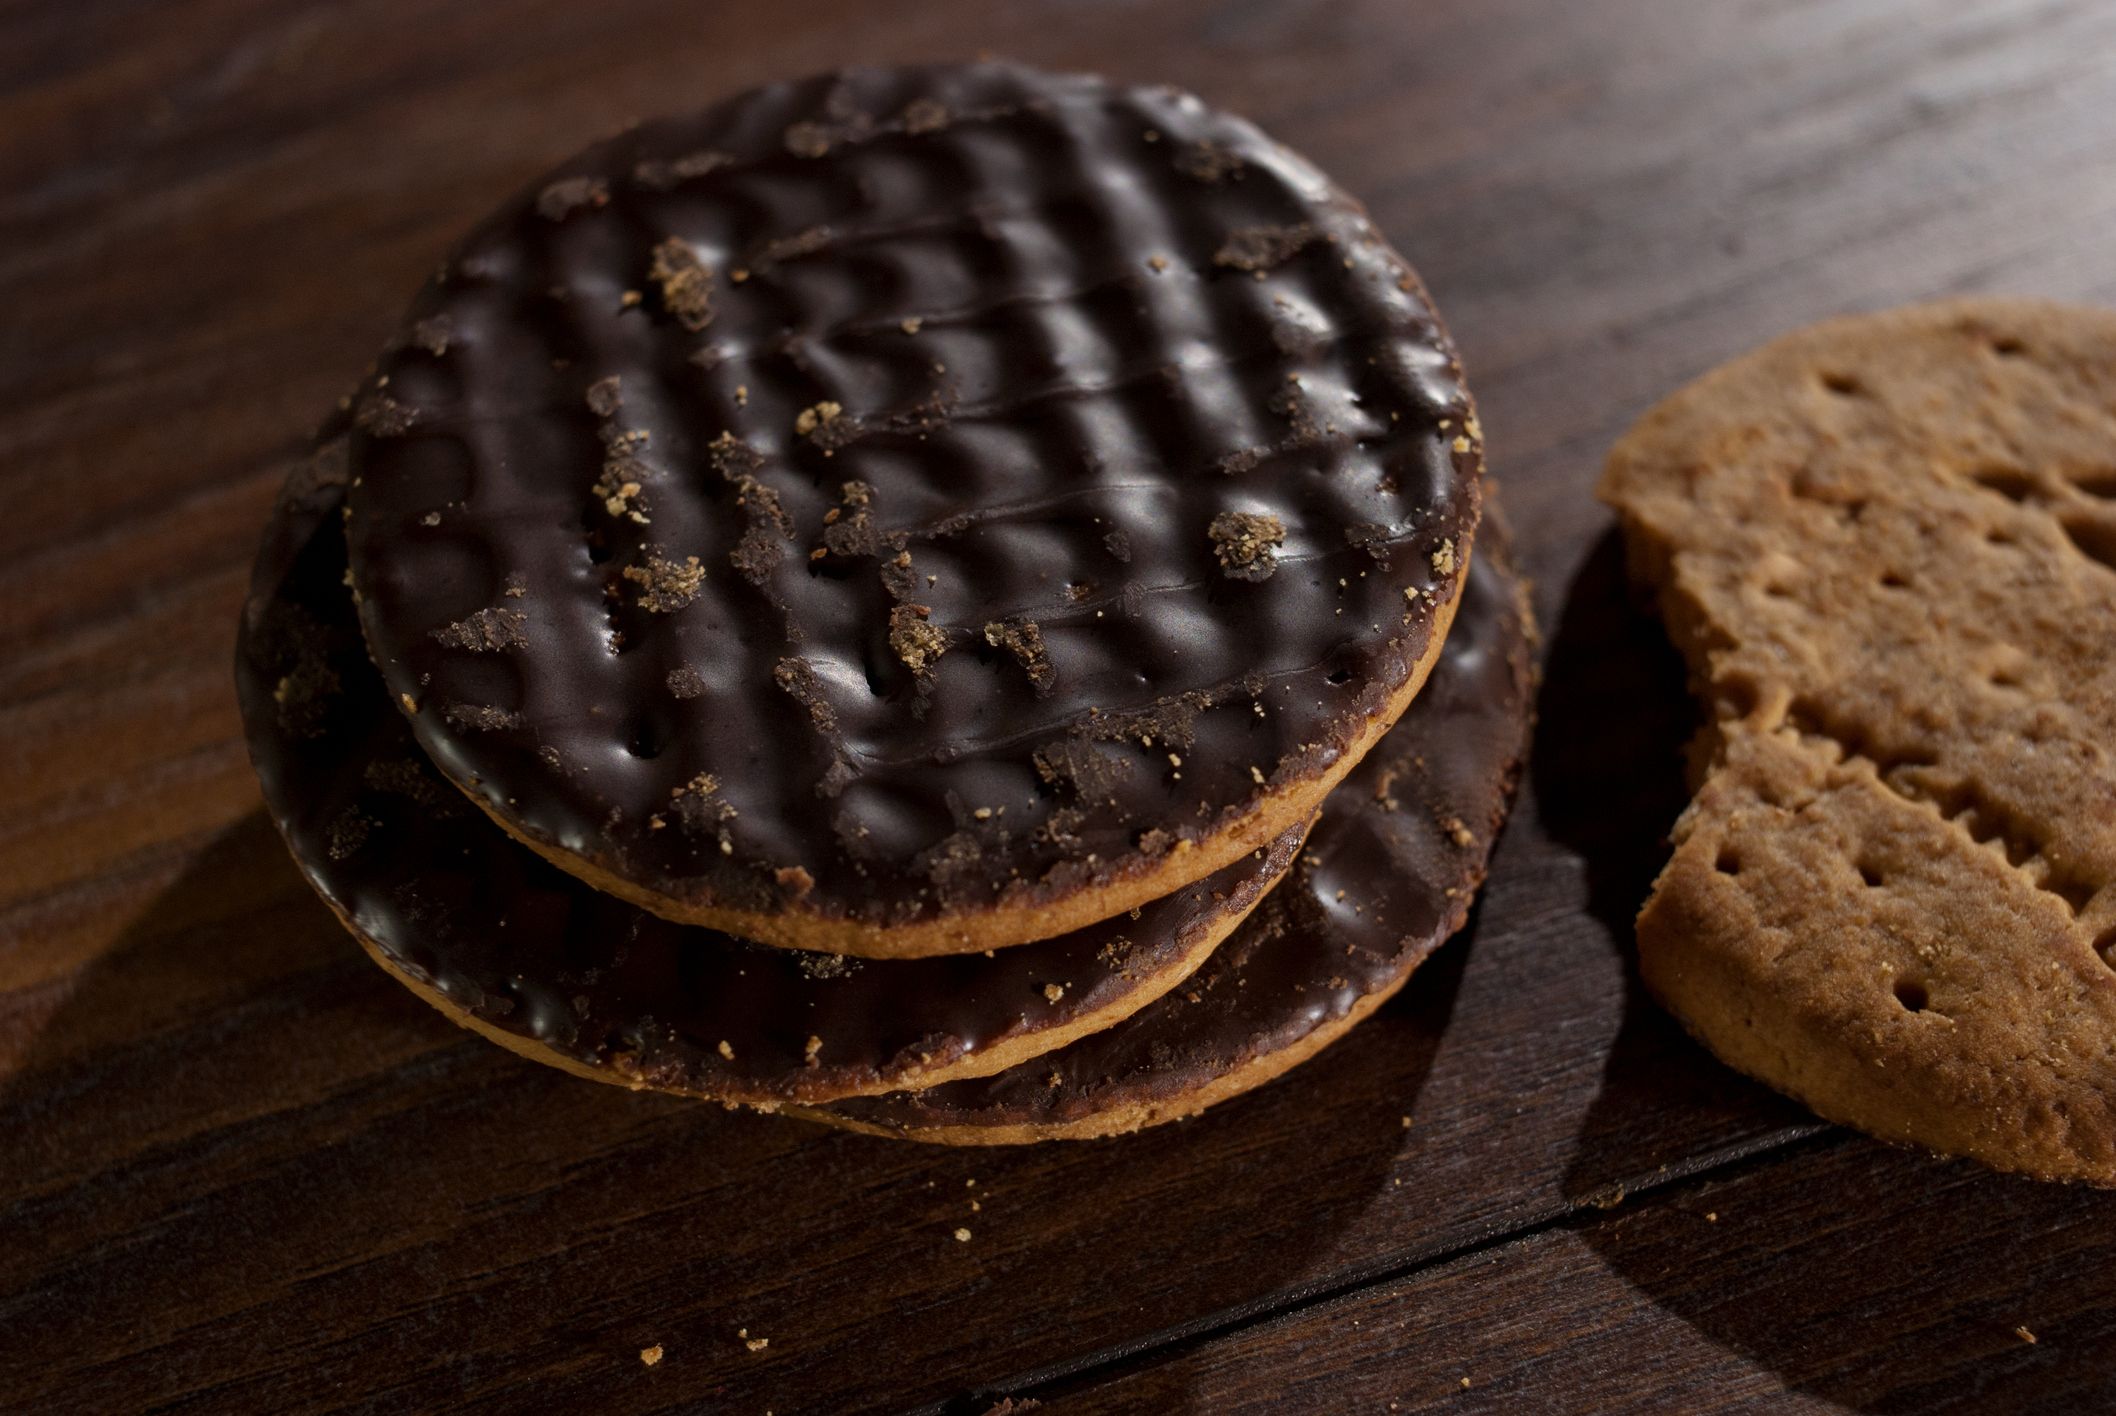 How to make chocolate digestive biscuits at home